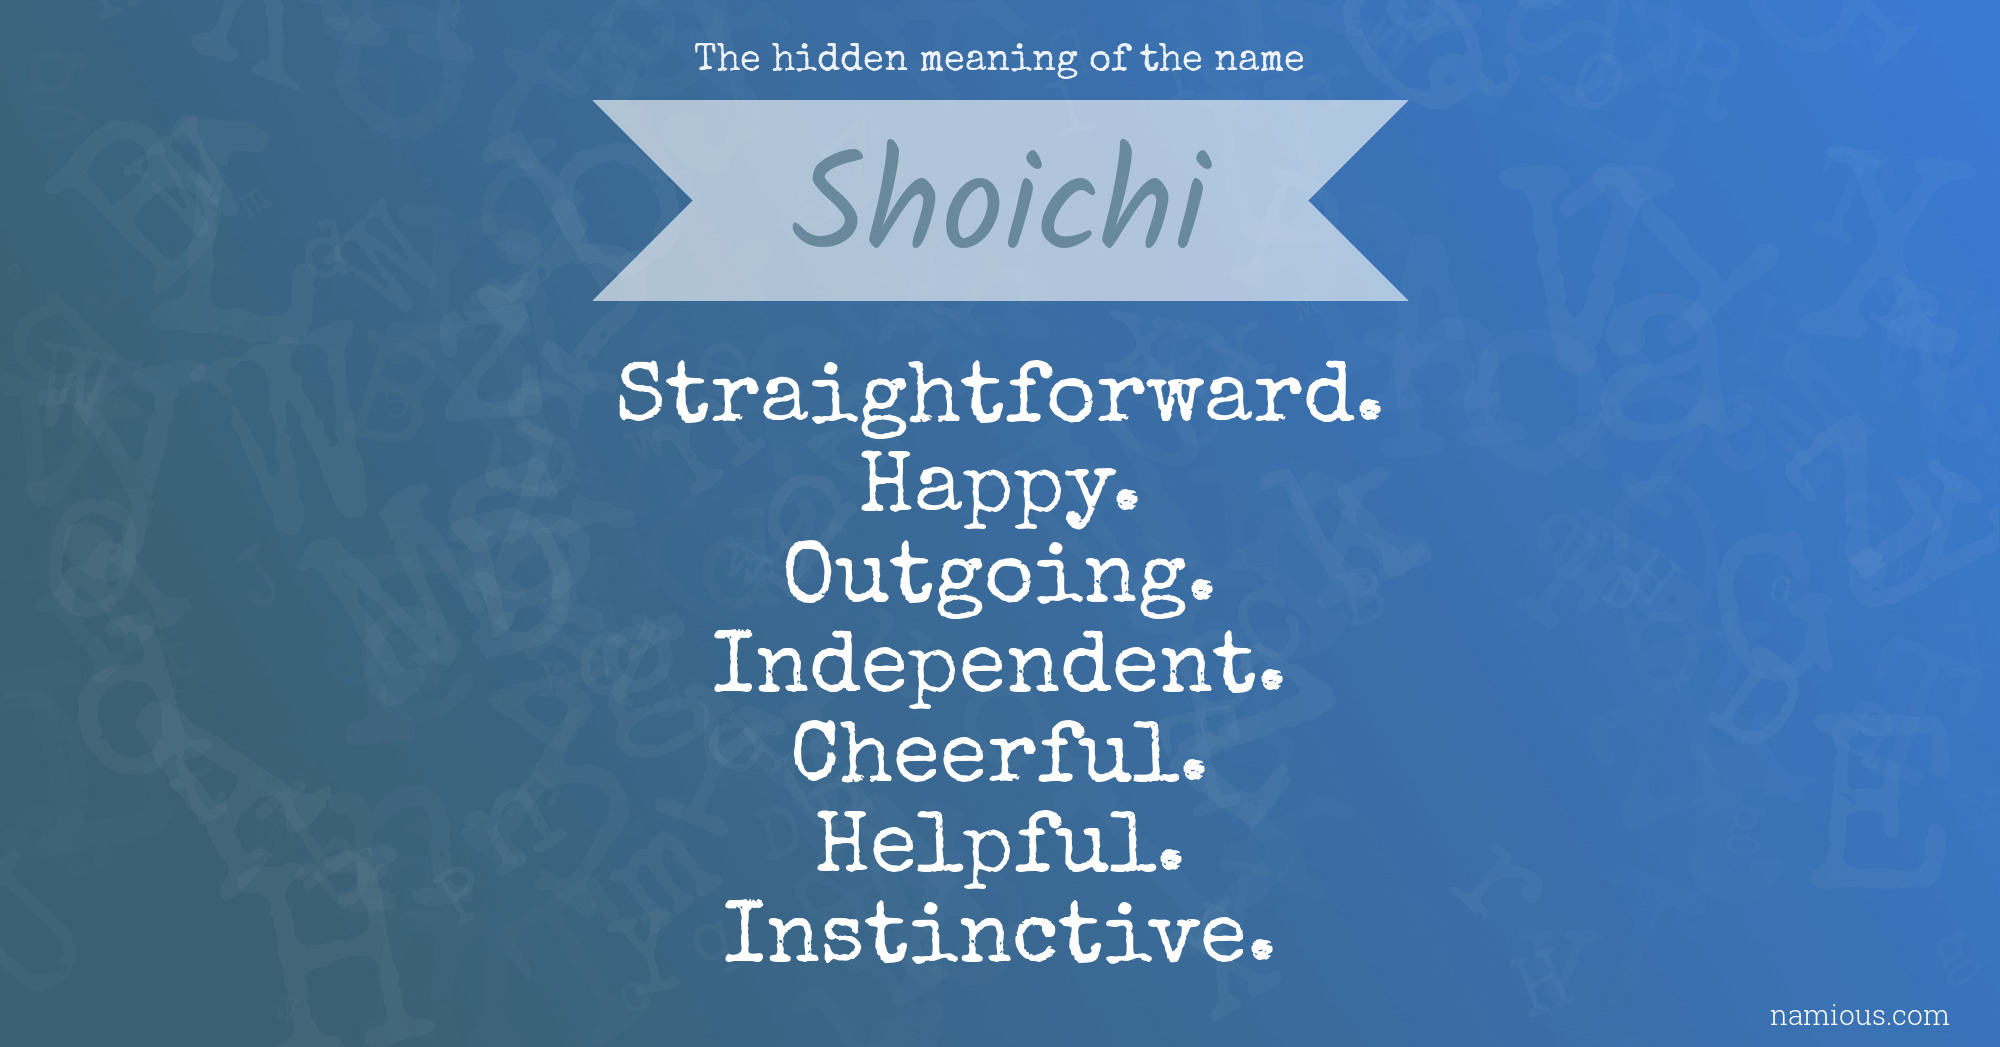 The hidden meaning of the name Shoichi